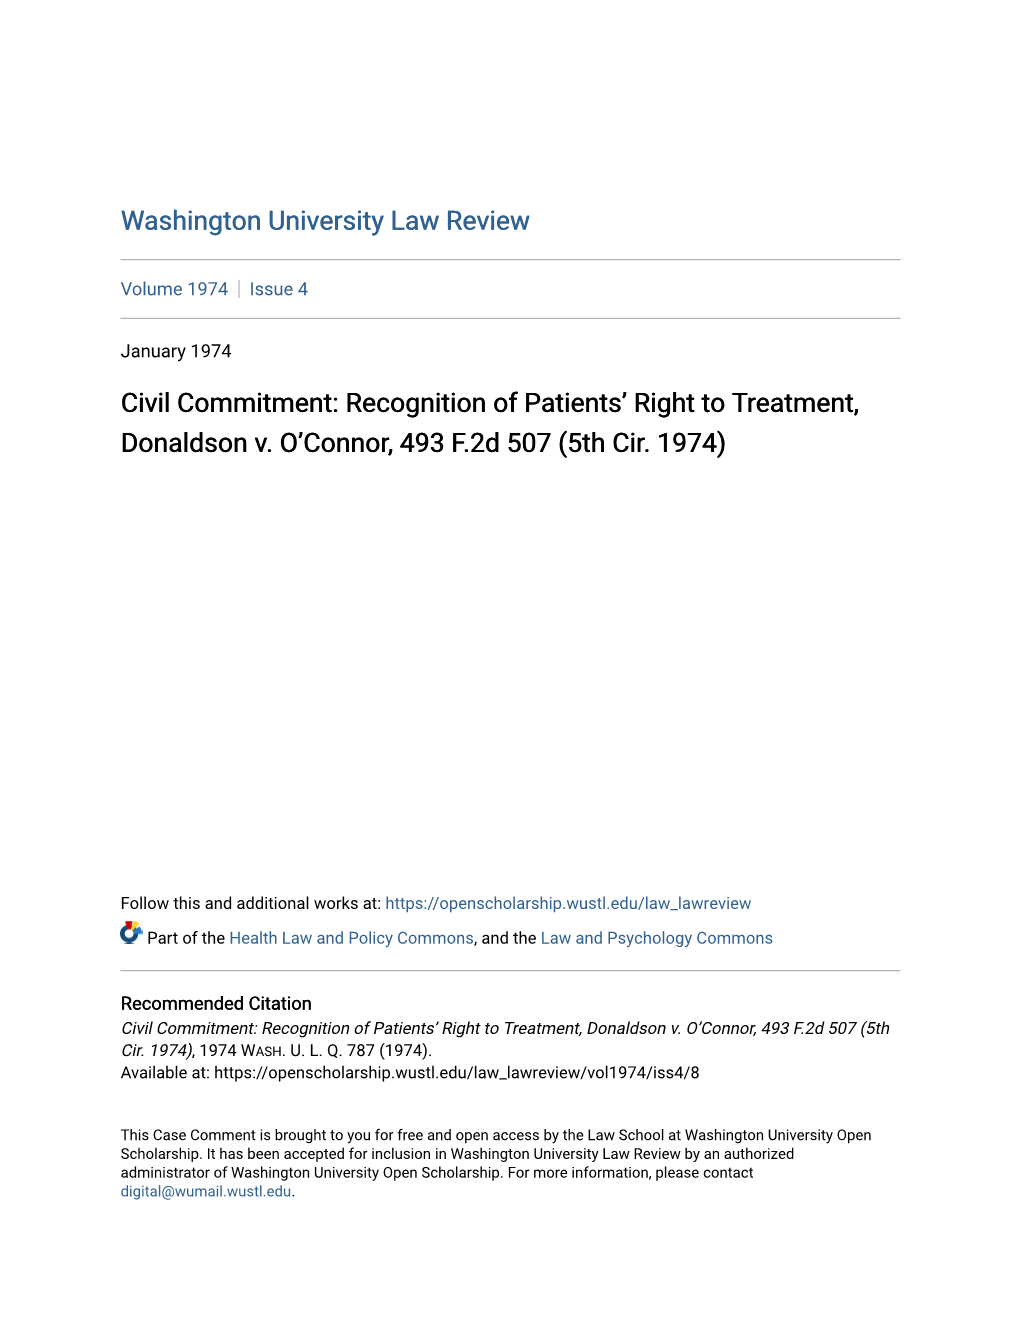 Civil Commitment: Recognition of Patients’ Right to Treatment, Donaldson V